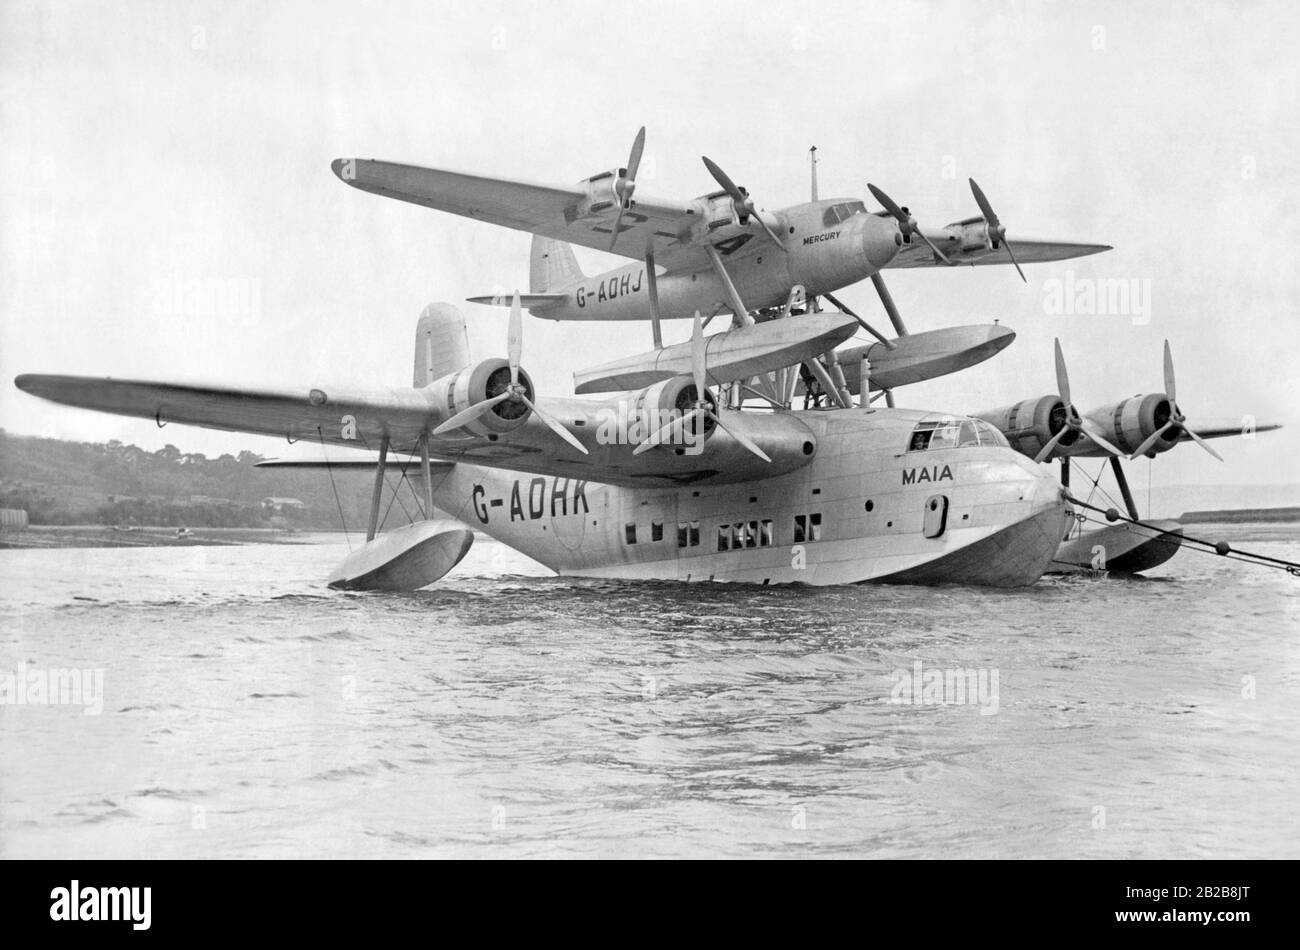 The Short Mayo Composite aircraft consists of a Short Empire flying boat (G-ADHK 'Maia') which carries a smaller Short Mercury seaplane (G-ADHJ). The 'Mercury' was carried by the 'Maia' up to cruising altitude, then the planes parted company and the 'Maia' returned to the airport of departure. Thus the 'Mercury' could cover longer distances. Stock Photo